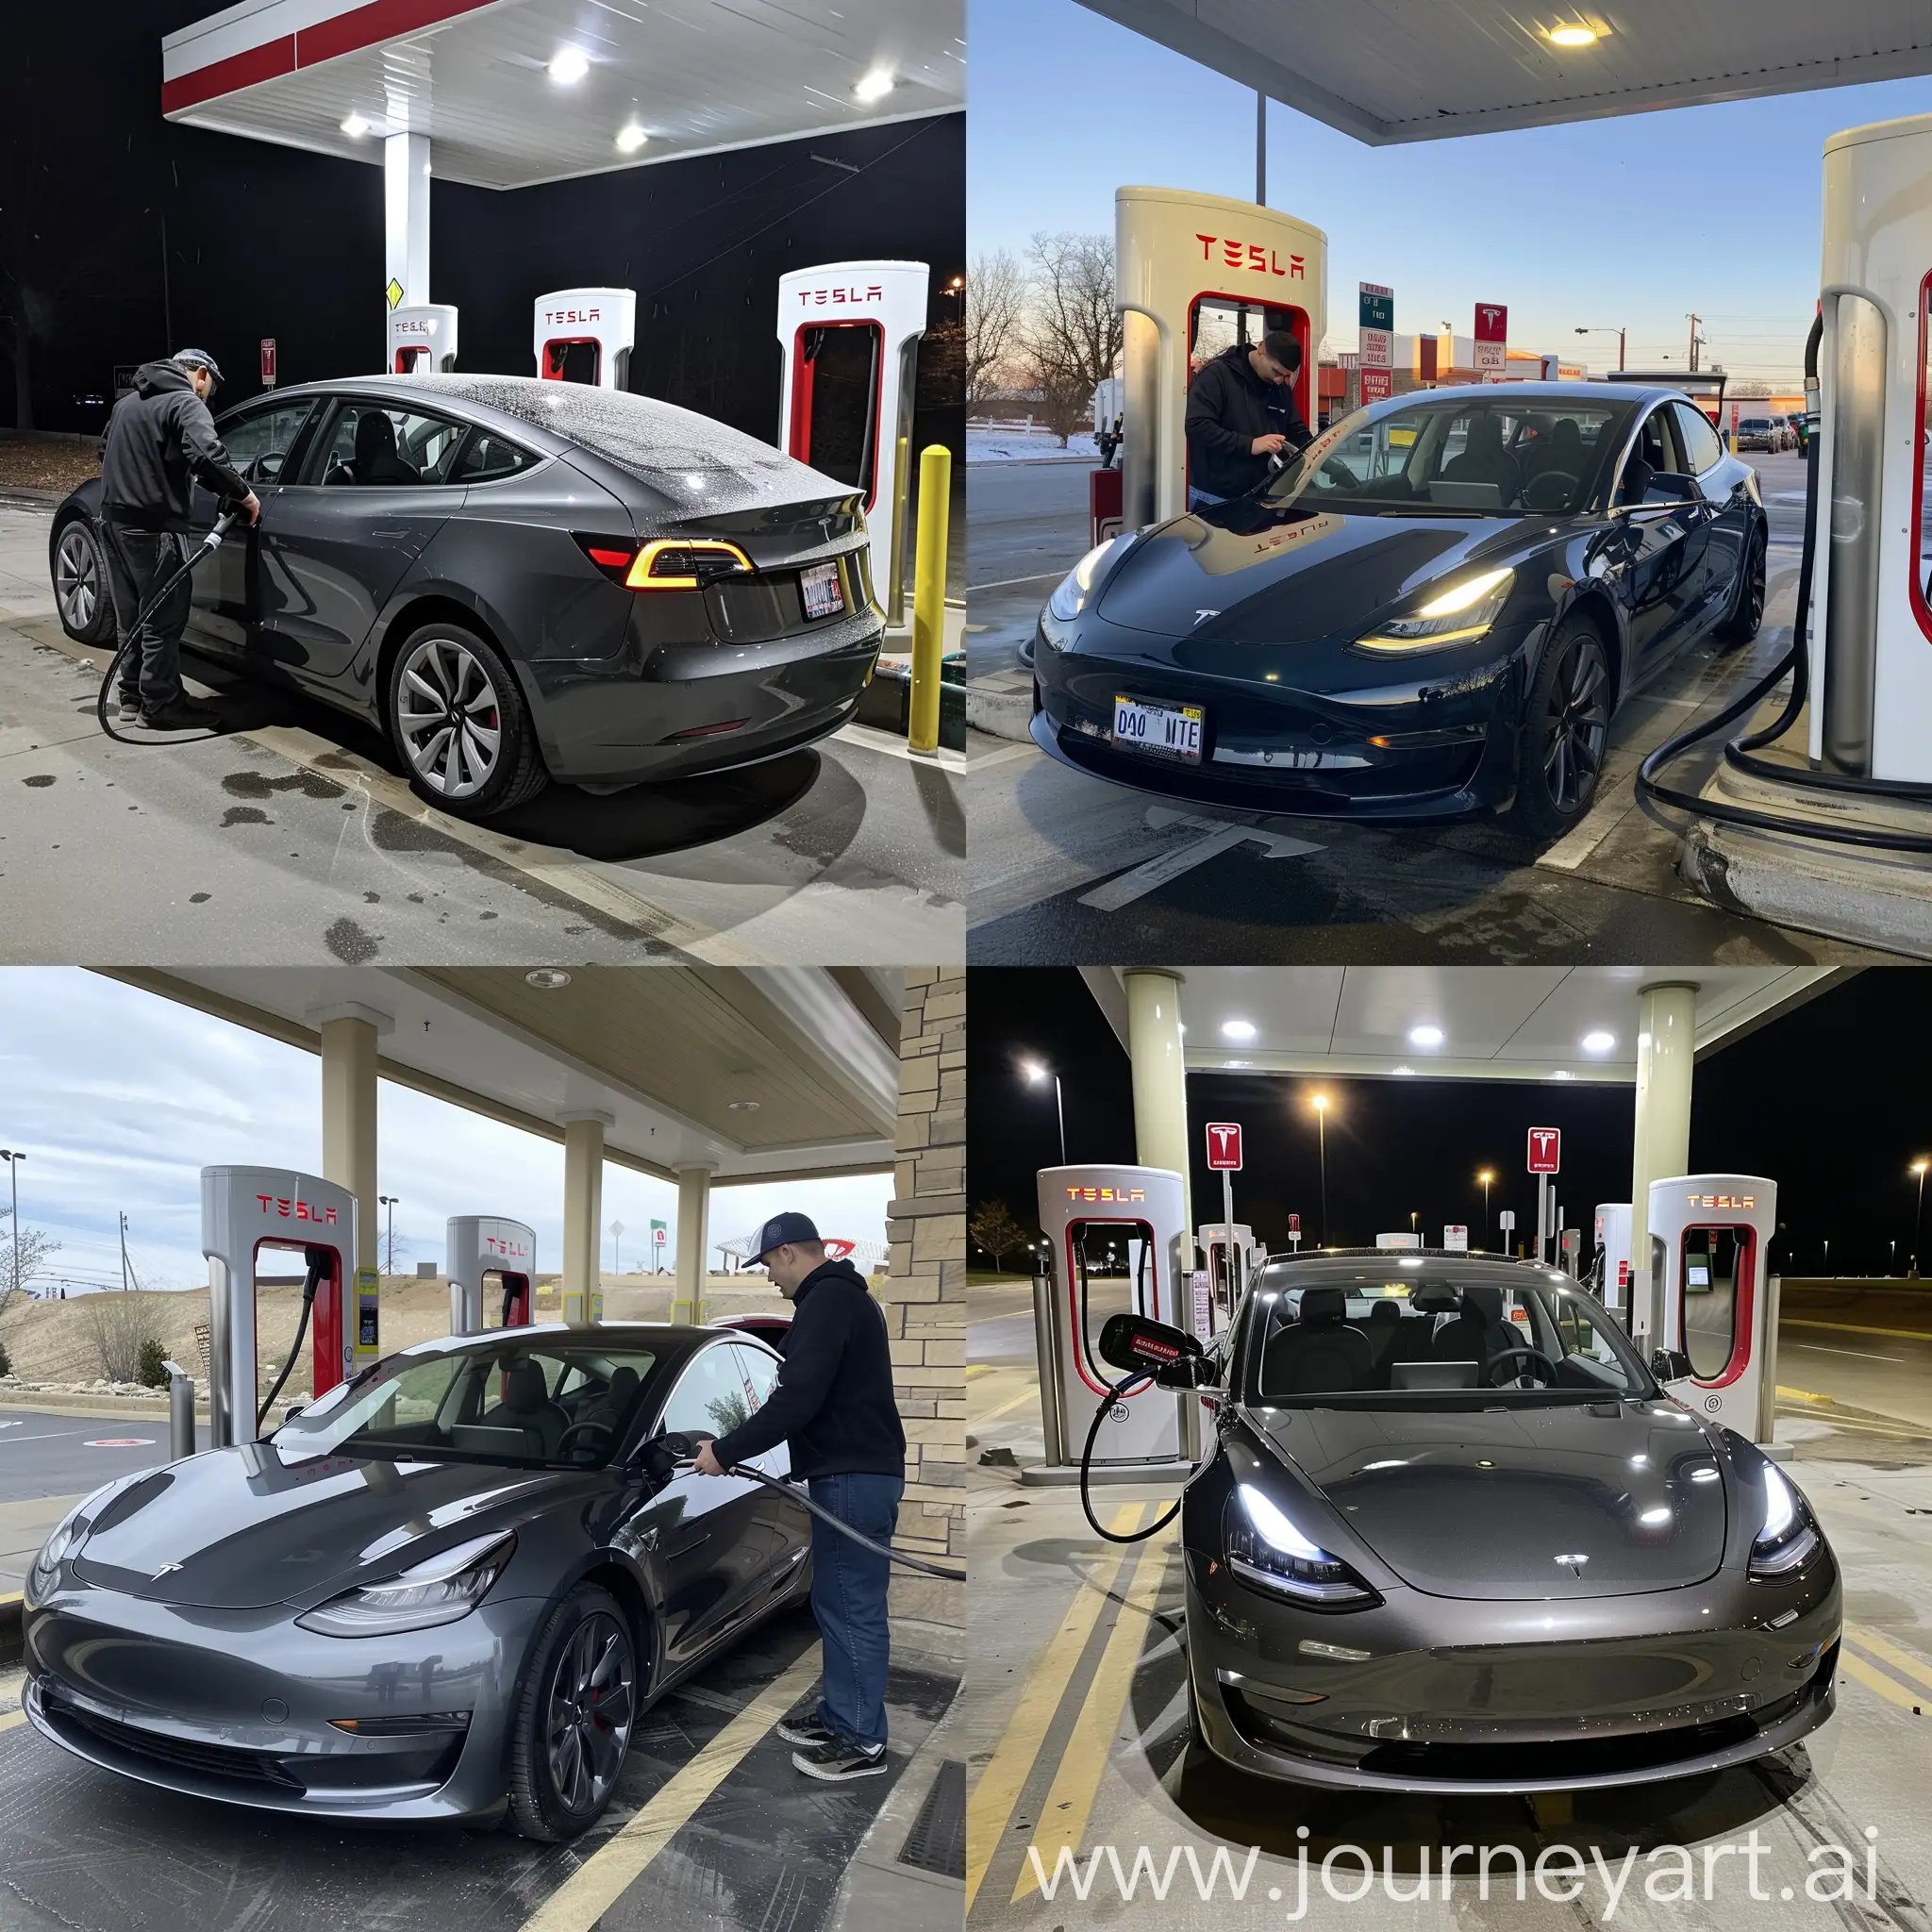 Tesla-Driver-Fueling-Electric-Car-at-Gas-Station